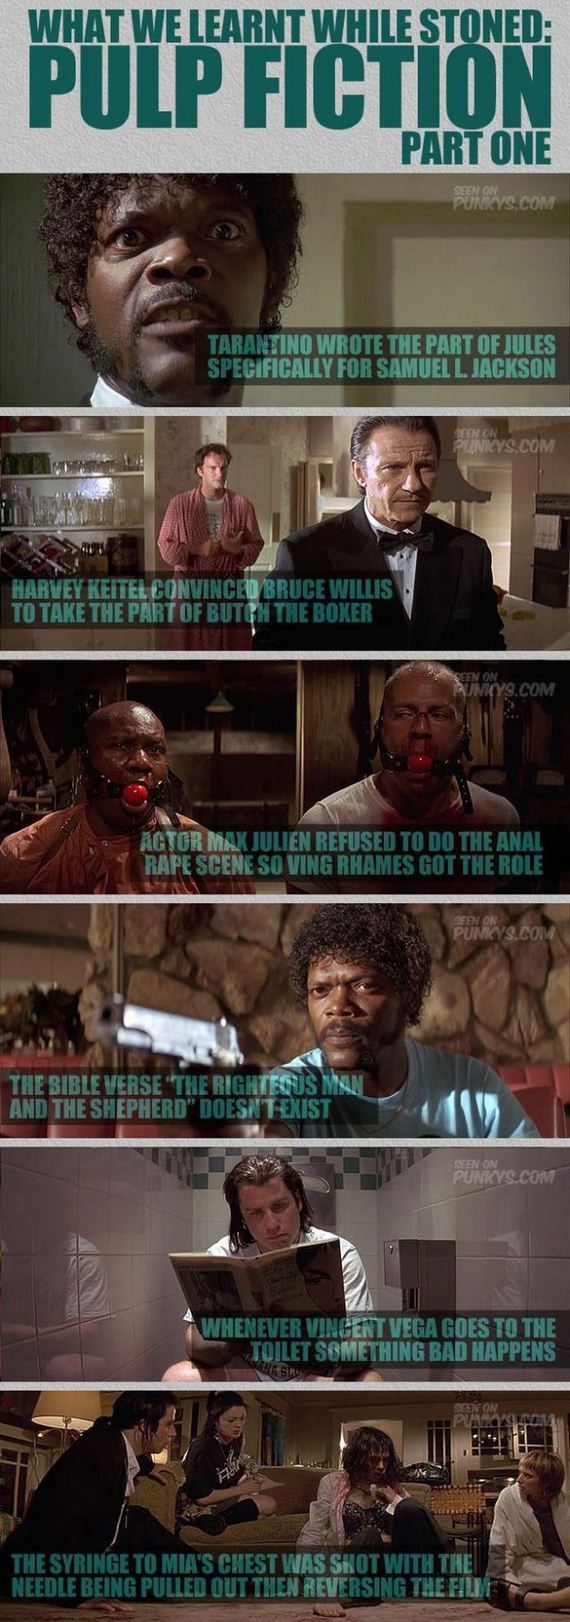 a_few_facts_you_probably_didnt_know_about_pulp_fiction